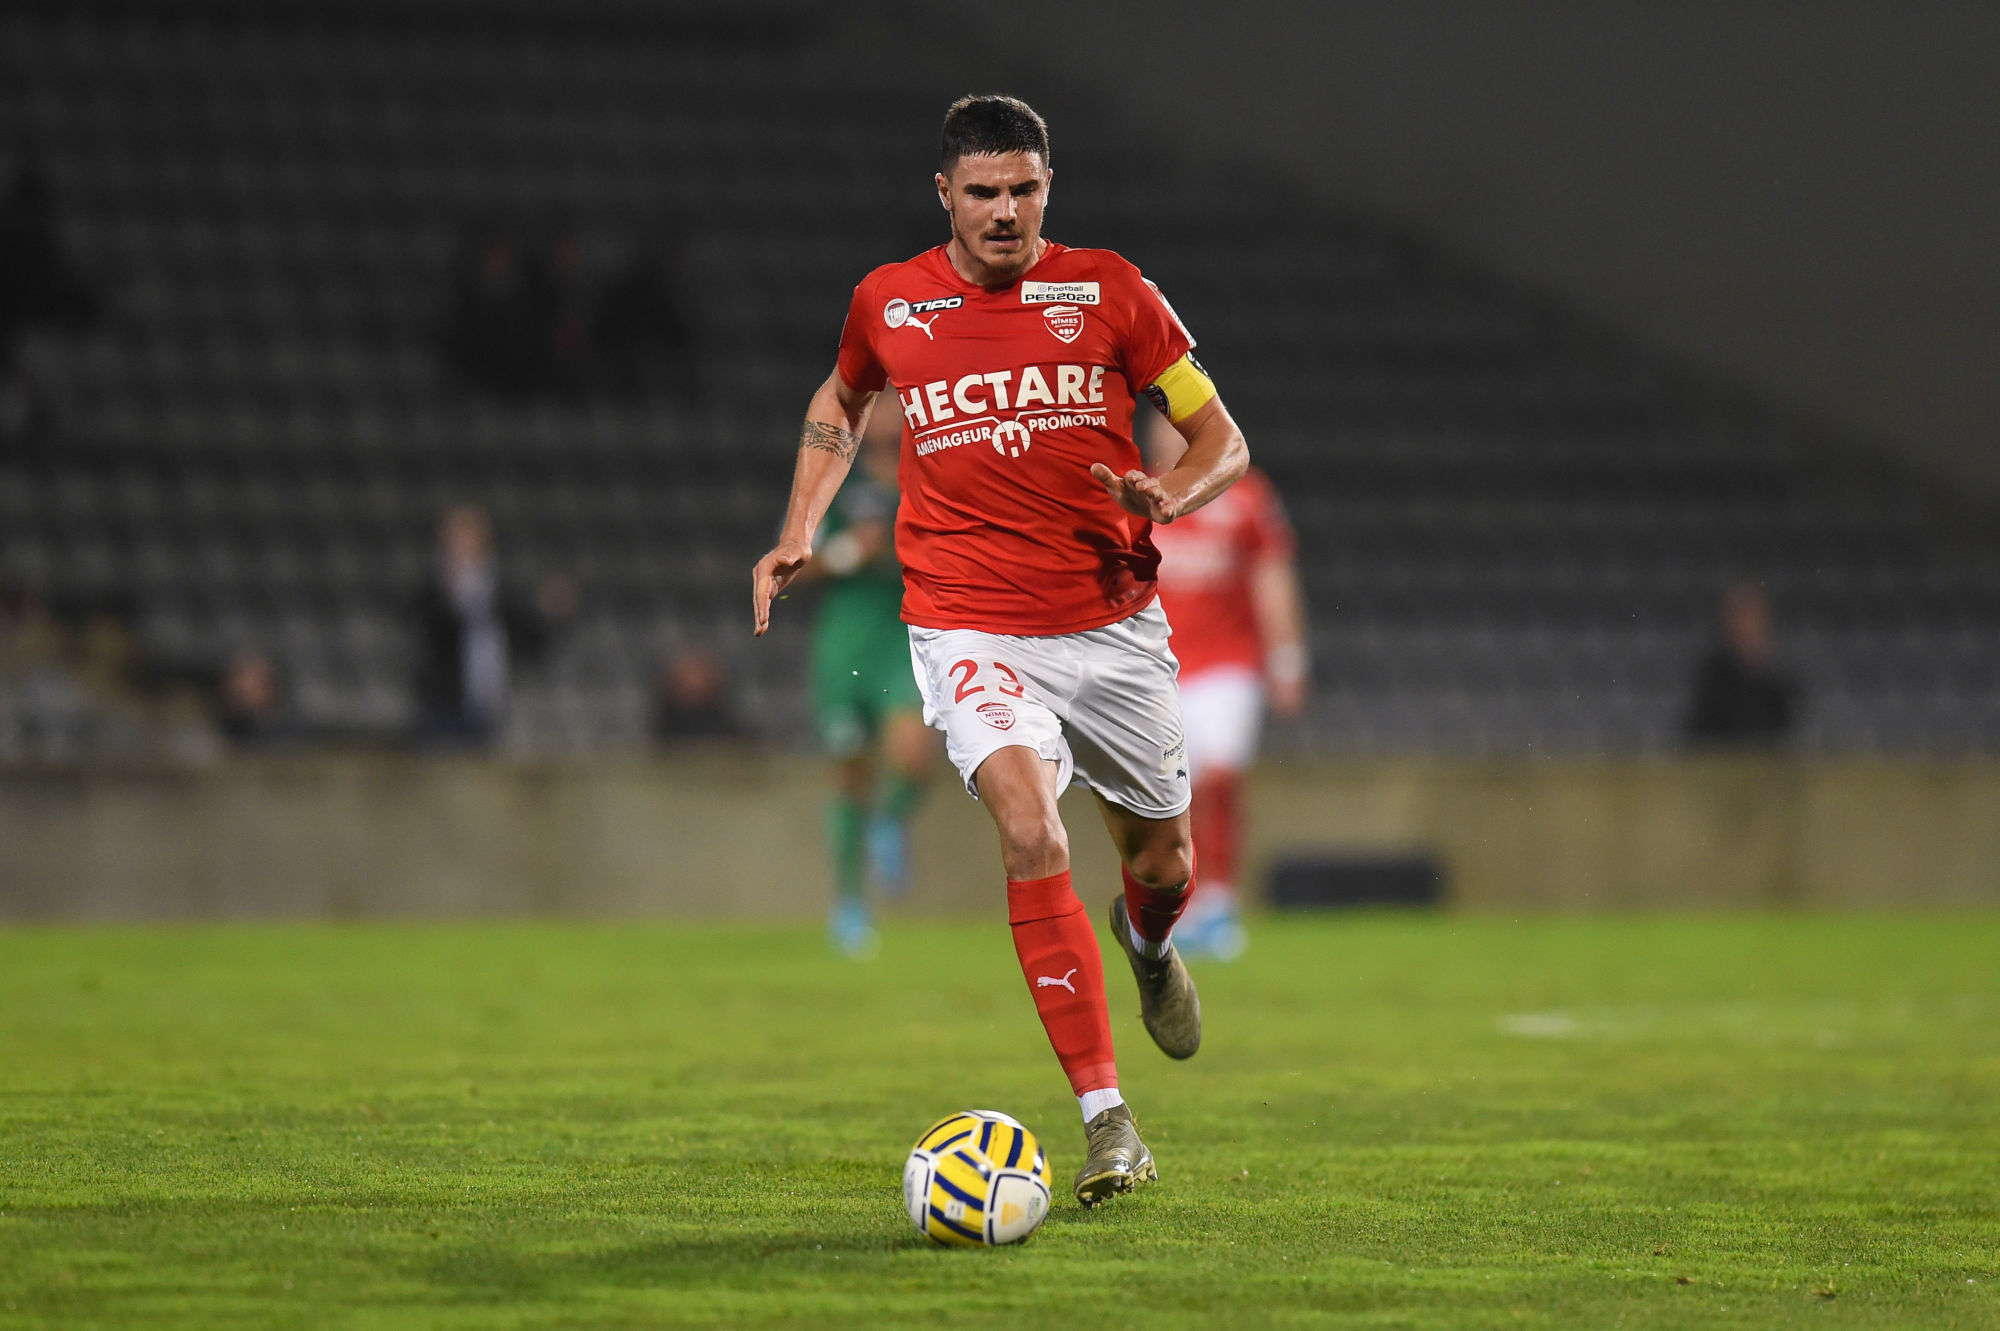 Anthony BRIANCON of Nimes  during the League Cup match between Nimes and Saint Etienne on December 18, 2019 in Nimes, France. (Photo by Alexandre Dimou/Icon Sport) - Anthony BRIANCON - Stade des Costières - Nimes (France)